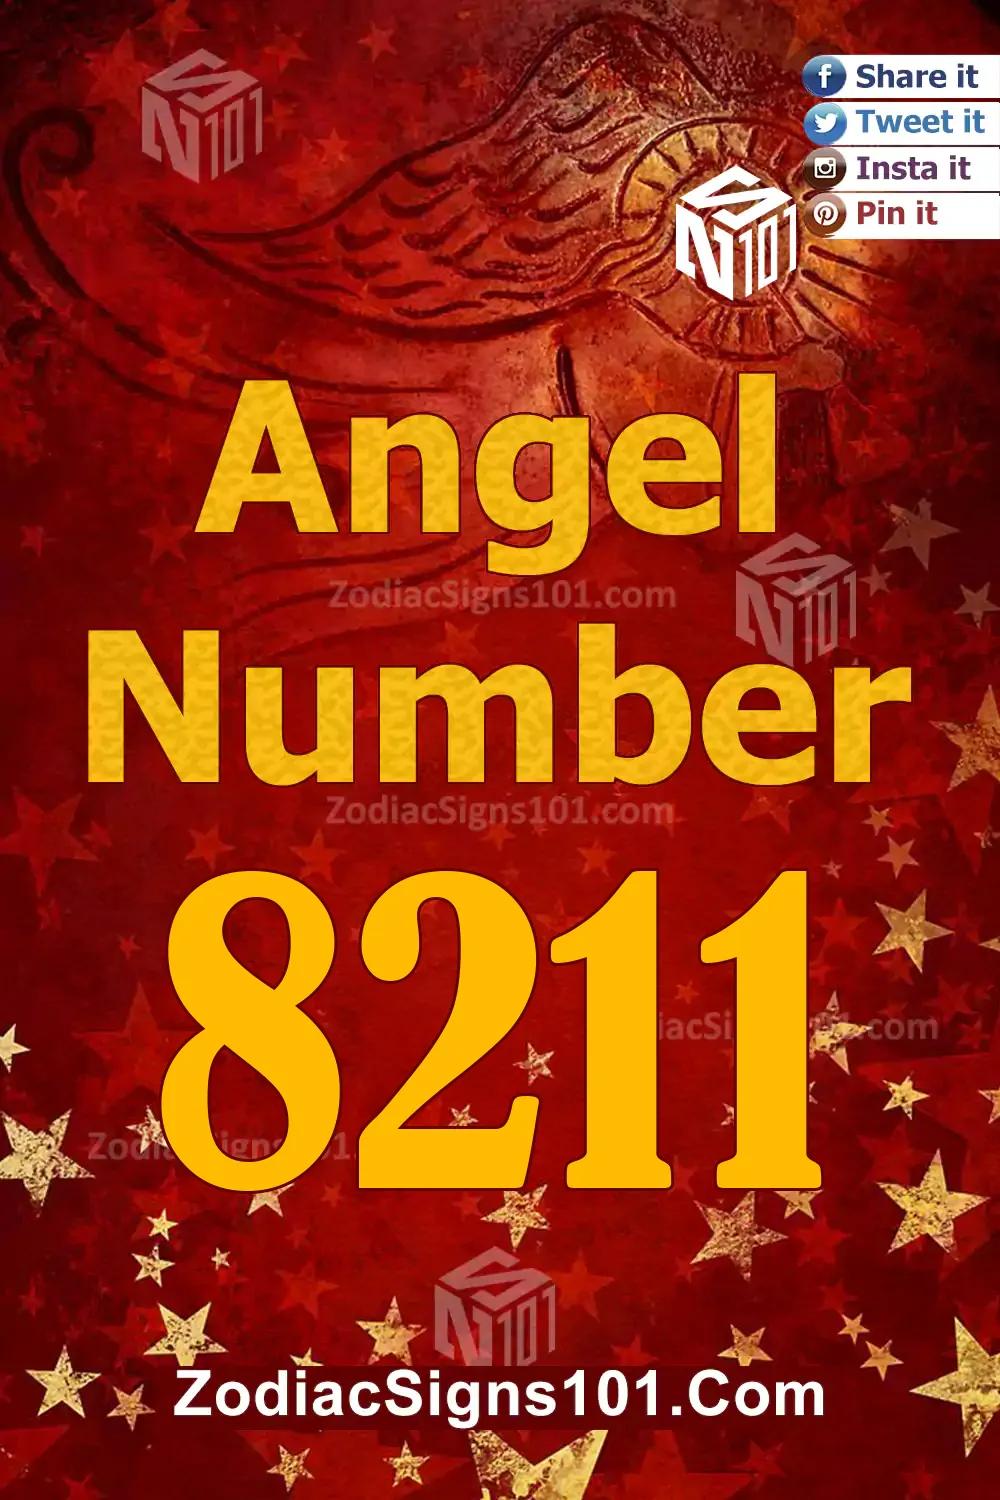 8211 Angel Number Meaning